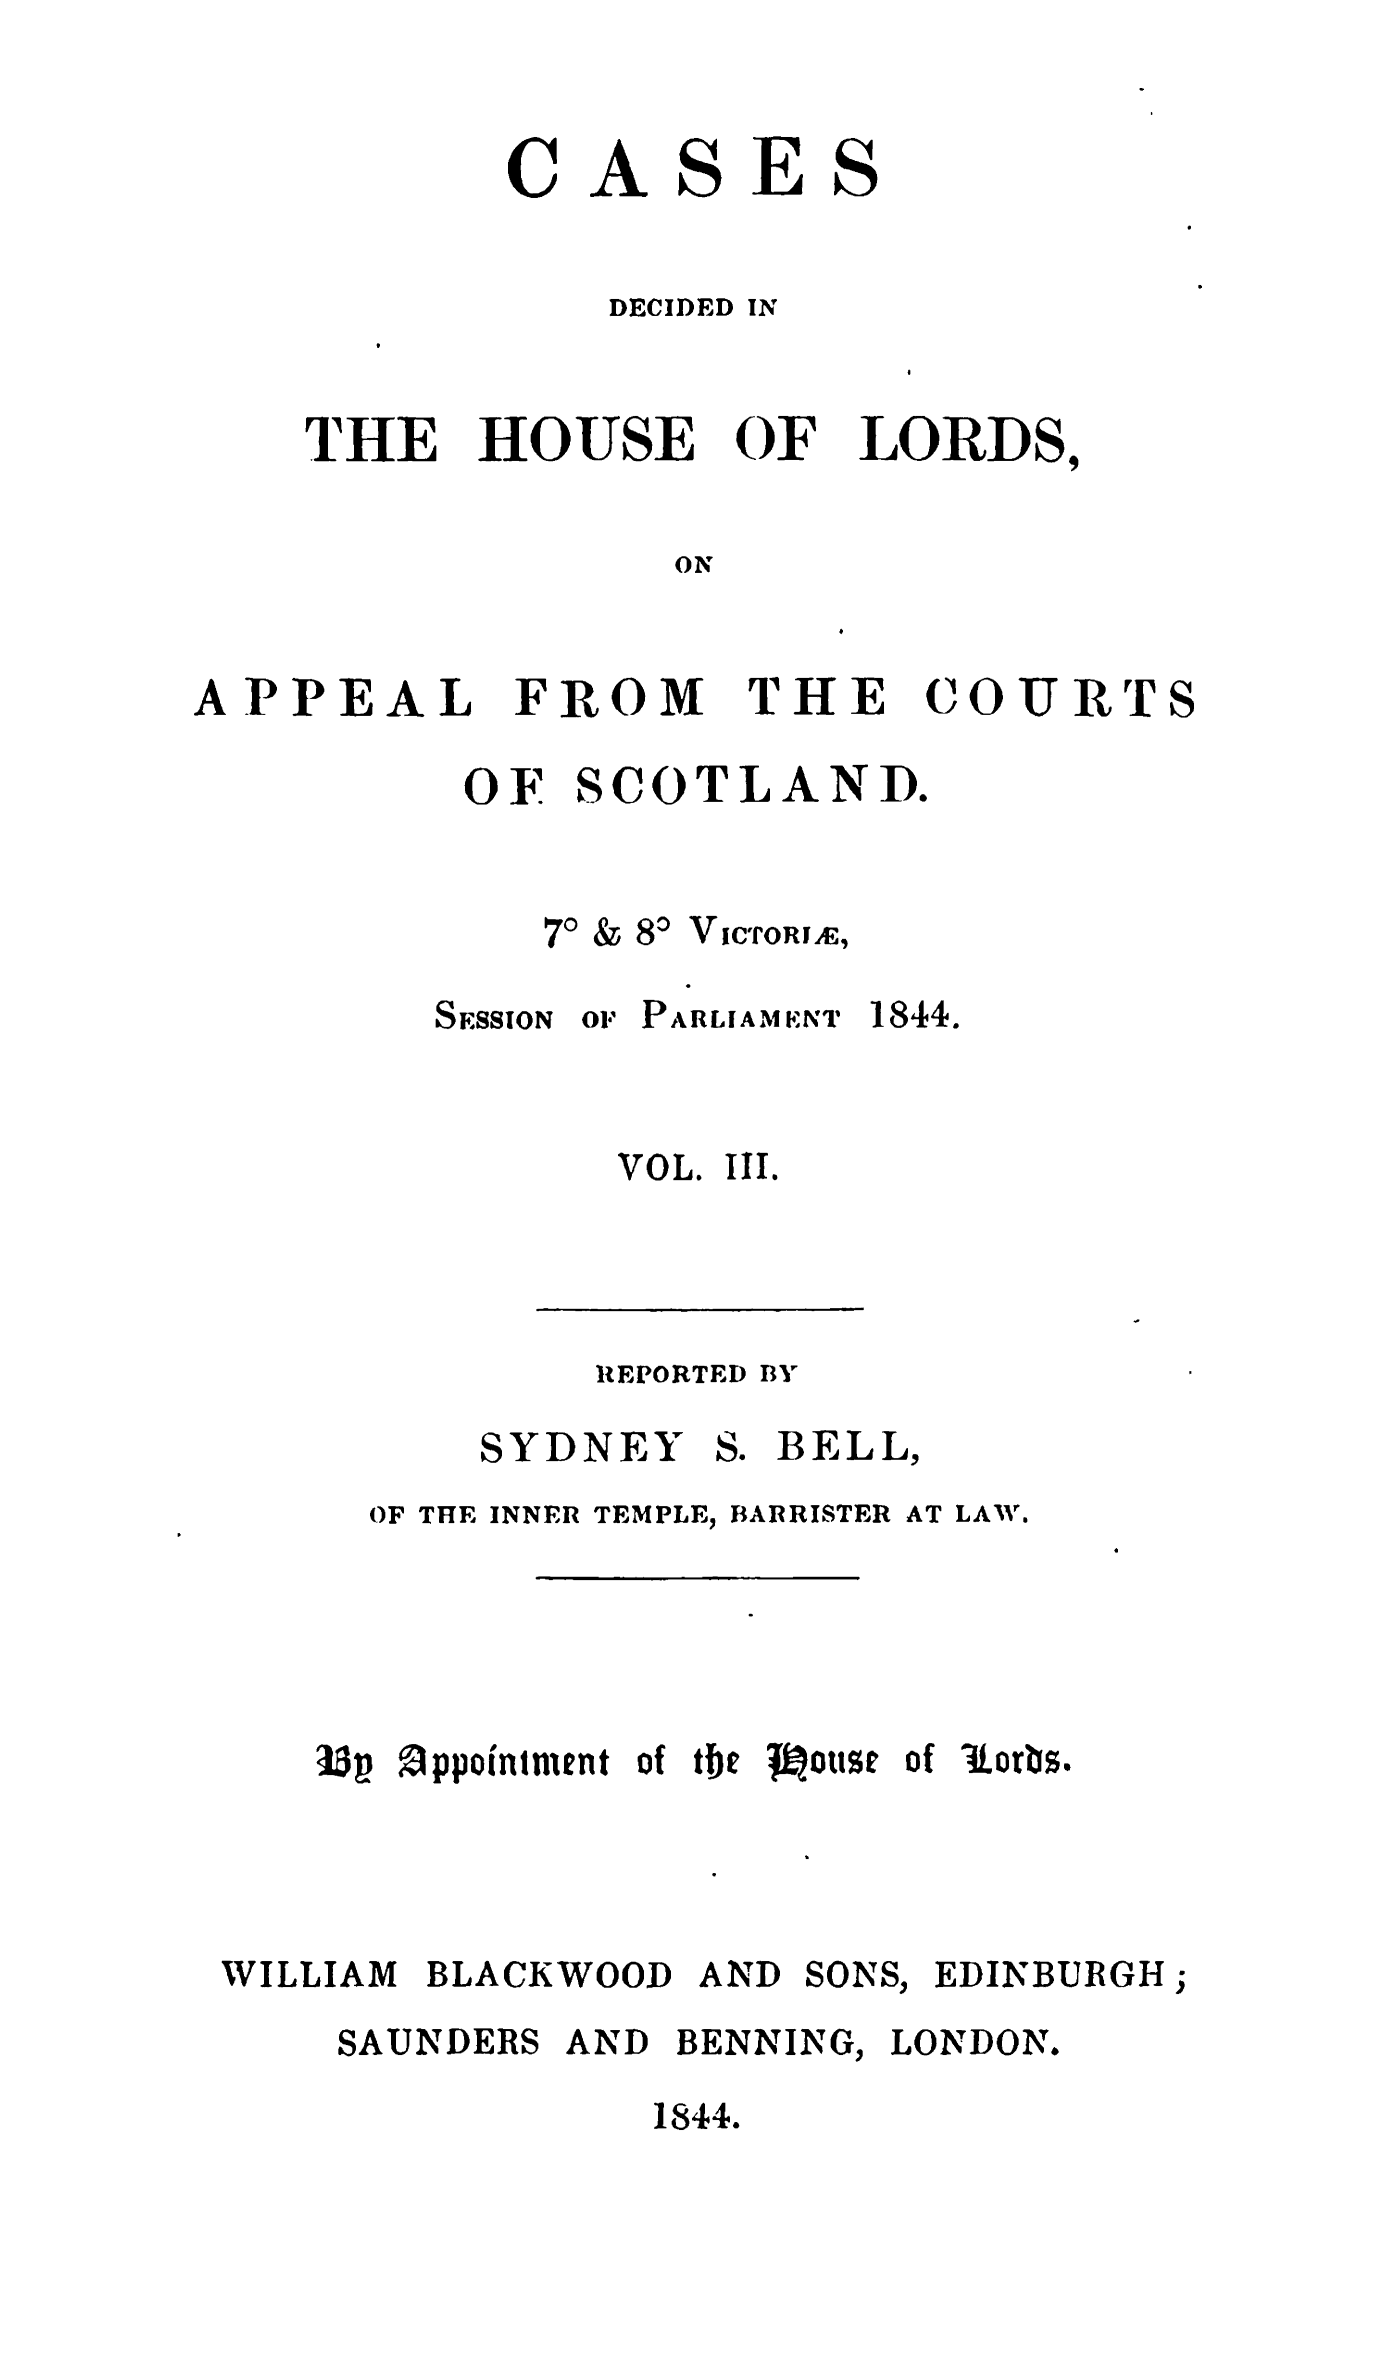 handle is hein.stair/cdhloapsct0003 and id is 1 raw text is: 


ASES


DECIDED IN


THE


HOUSE


OF


LORDS,


ON


FROM


THE


COURT


OF


S COTLANID.


V ICTORIE,


SESSION


Or PARLIAMENT


1844.


VOL. III.


REPORTED BY


SYDNEY


so


BELL,


OF THE INNER TEMPLE, BARRISTER


l5p !1ppointment of tbh jiotse of torbs.


WILLIAM BLACKWOOD AND


SONS,


EDINBURGH


SAUNDERS


AND


BENNING,


LONDON.


1844.


C


APPEAL


S


70


AT LAW'.


80


